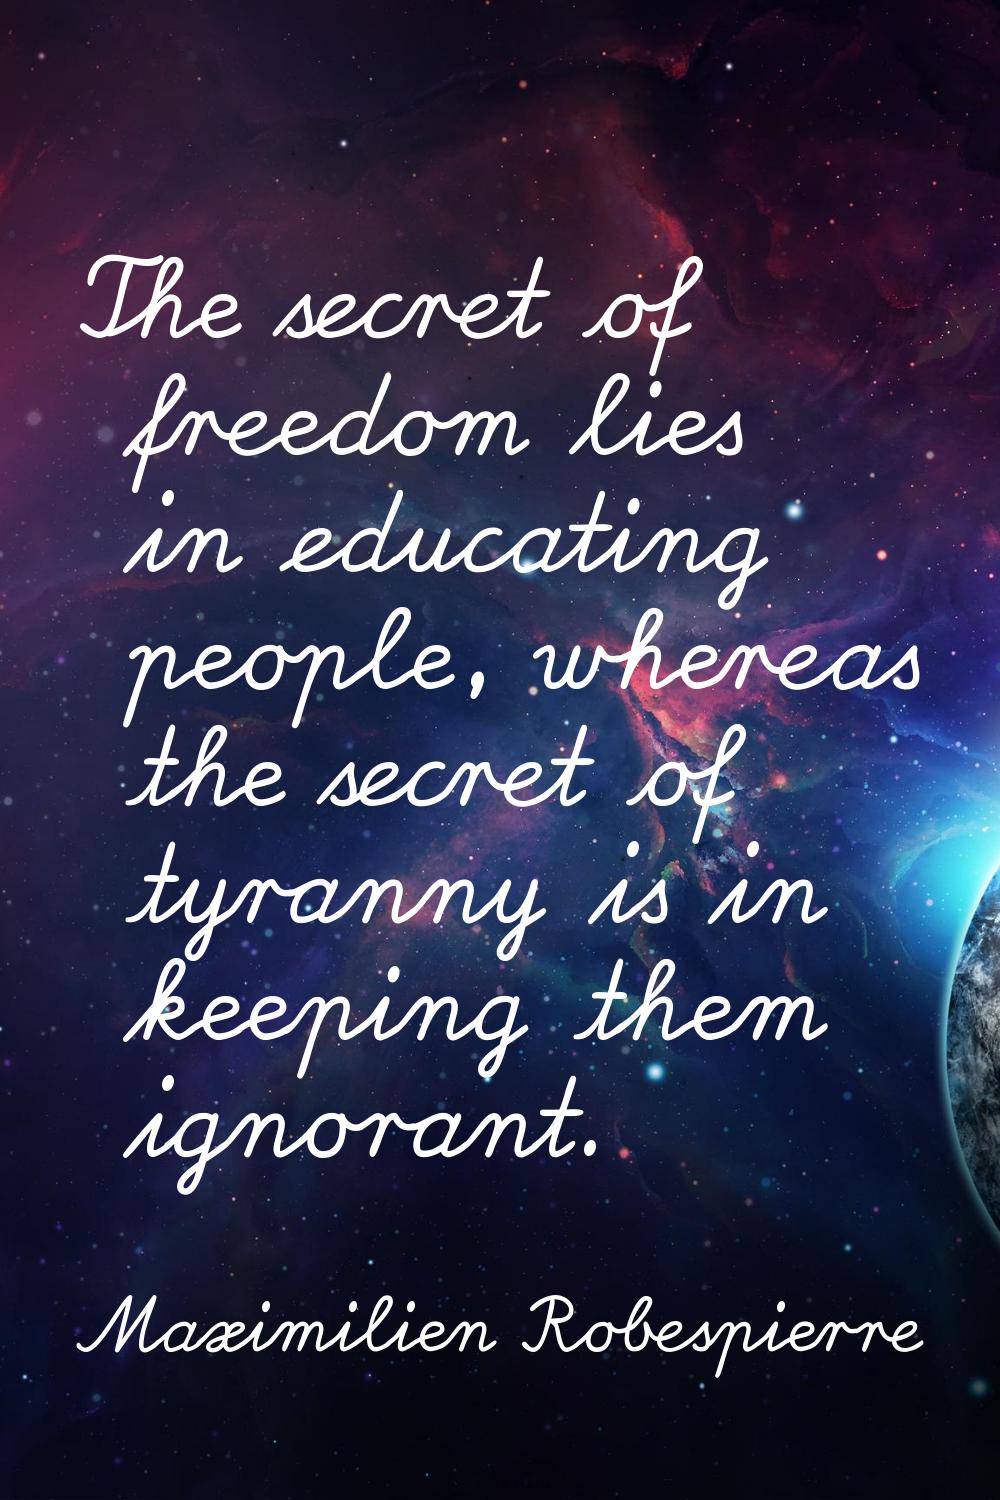 The secret of freedom lies in educating people, whereas the secret of tyranny is in keeping them ig